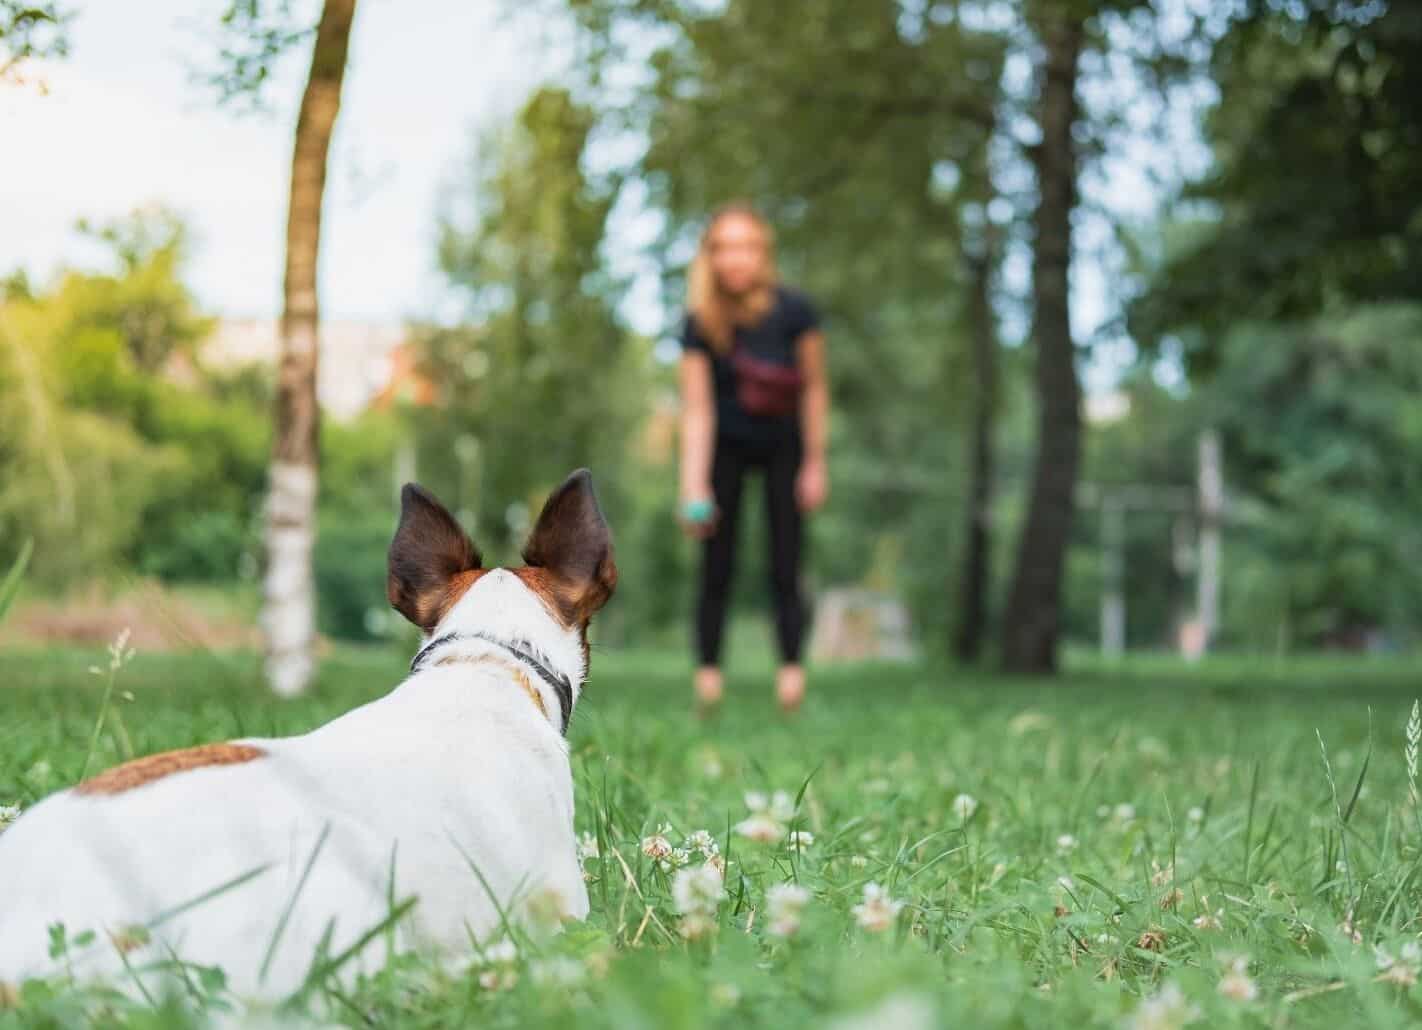 can dogs recognize their owners